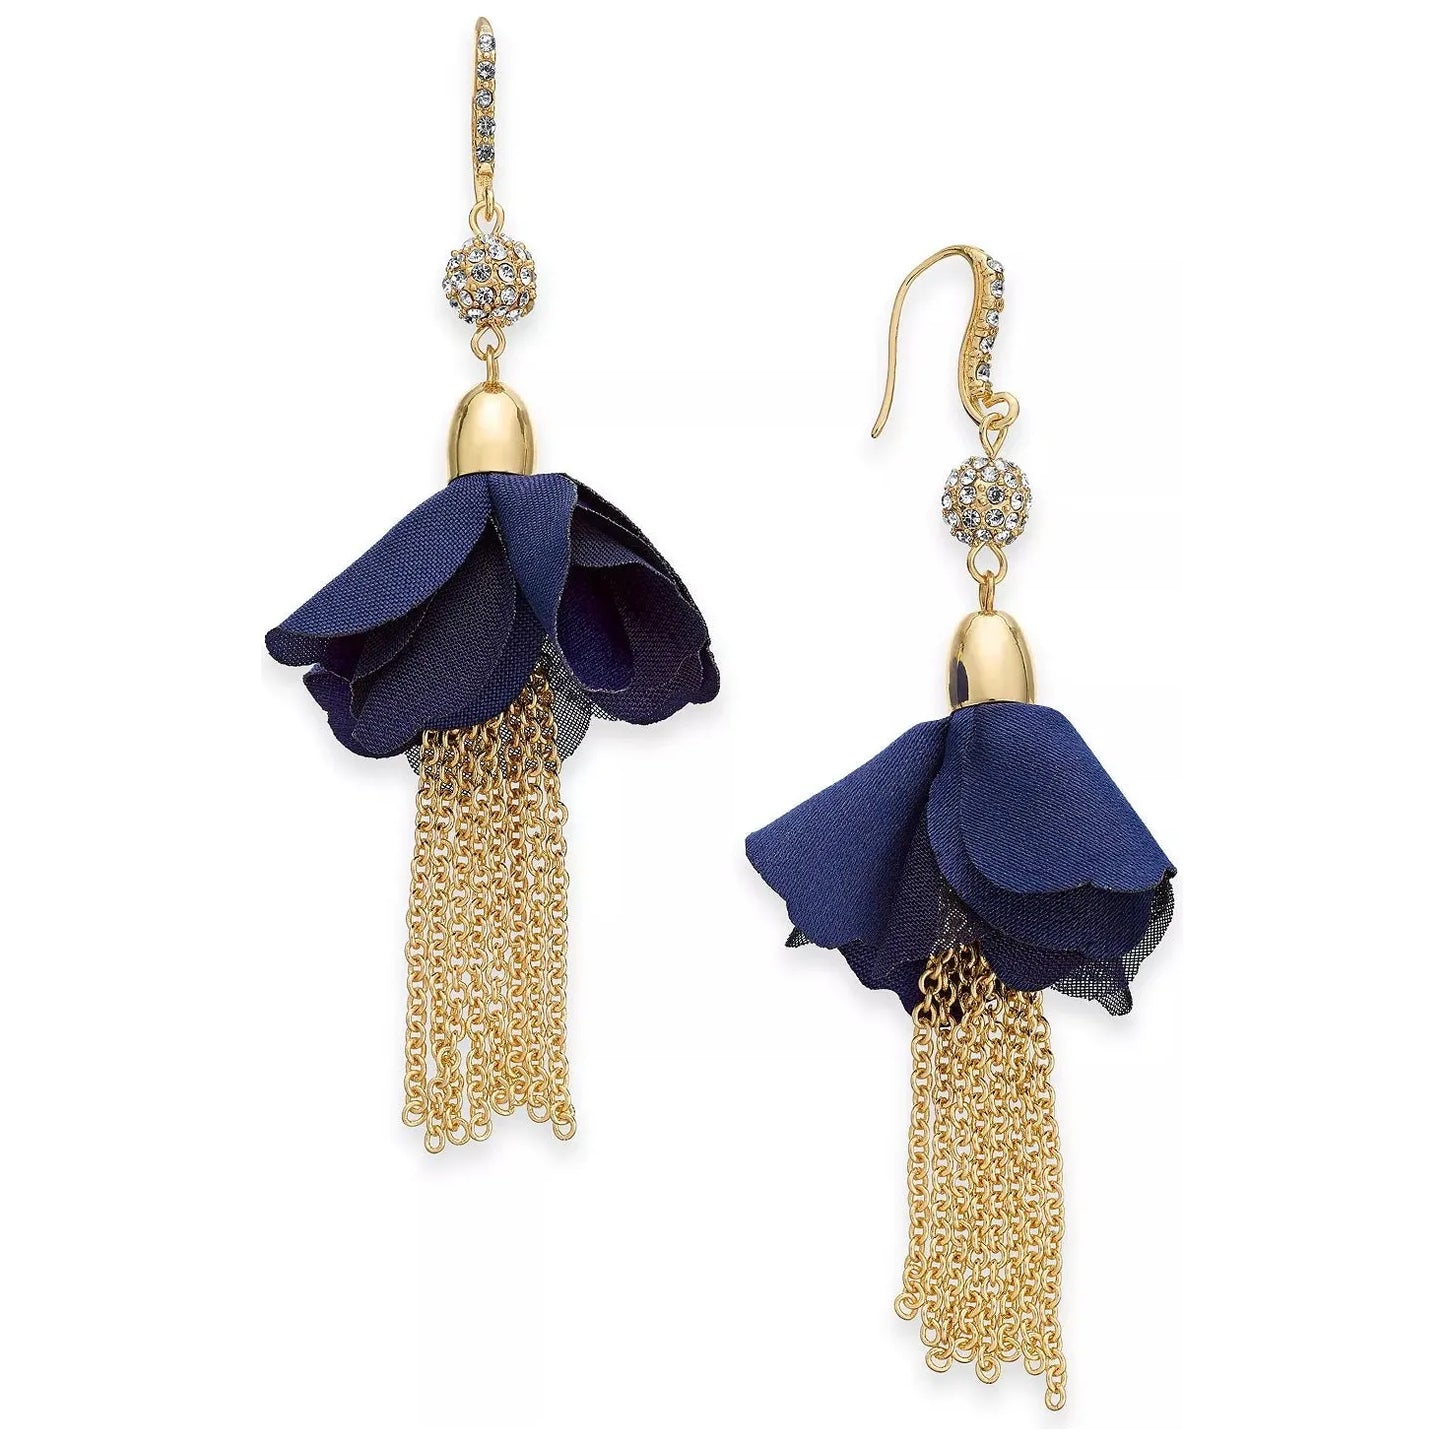 INC International Concepts-INC Gold Tone Crystal Bead, Fabric Flower & Chain Tassel Drop Earrings, Created for Macys - Brandat Outlet